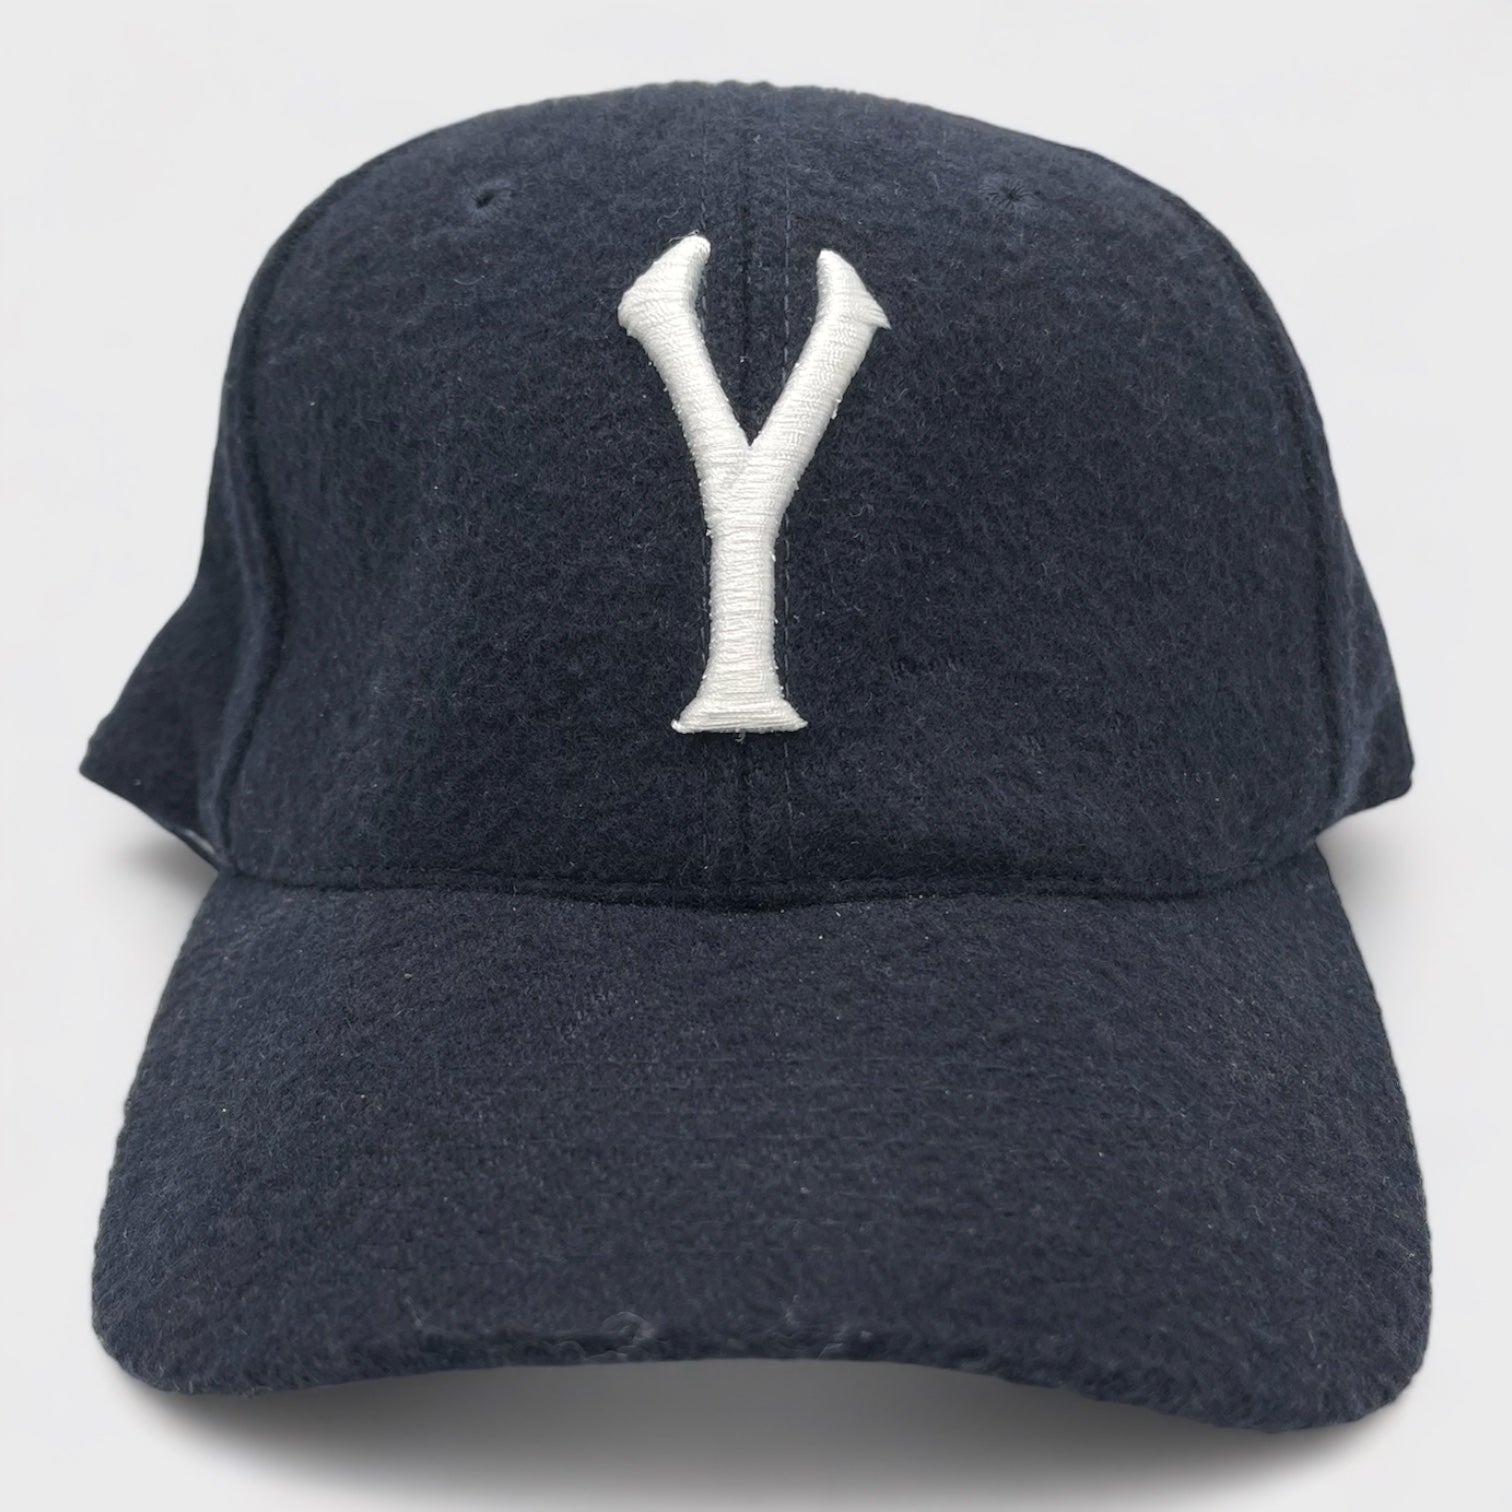 Vintage New York Yankees Fitted Hat 7 1/8